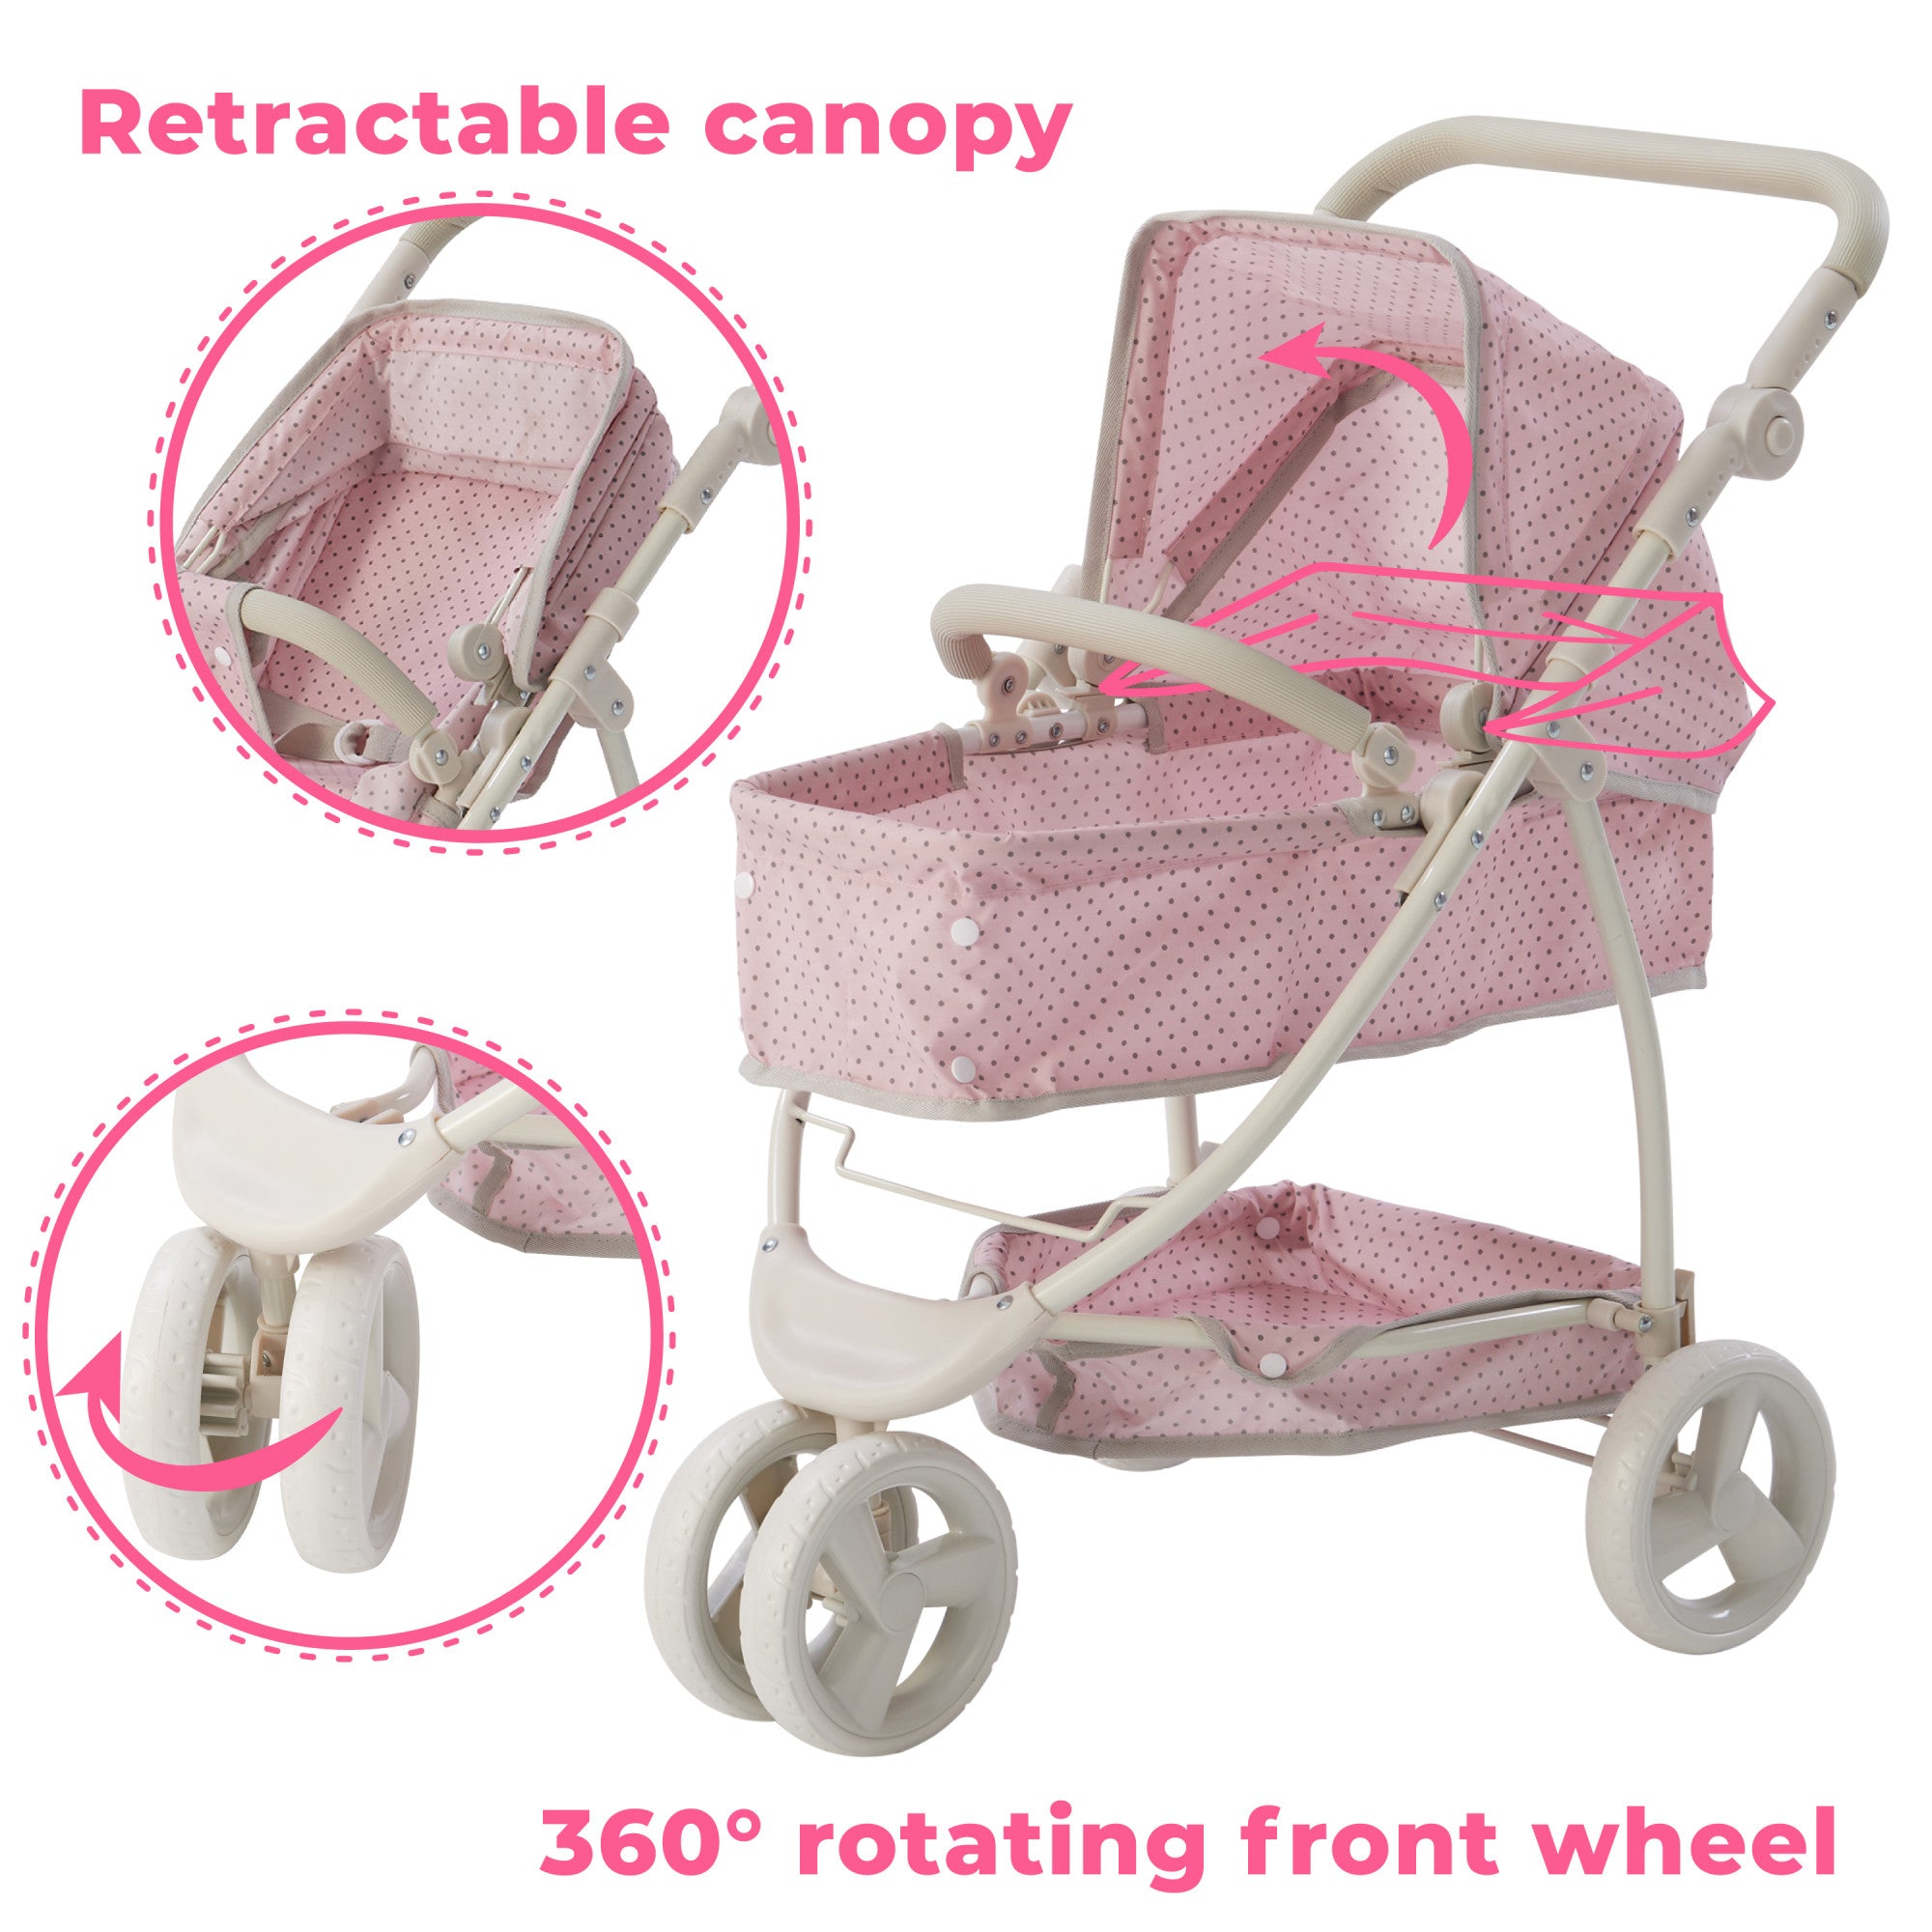 Olivia's Little World Polka Dots Princess 2-in-1 Baby Doll Stroller, Pink